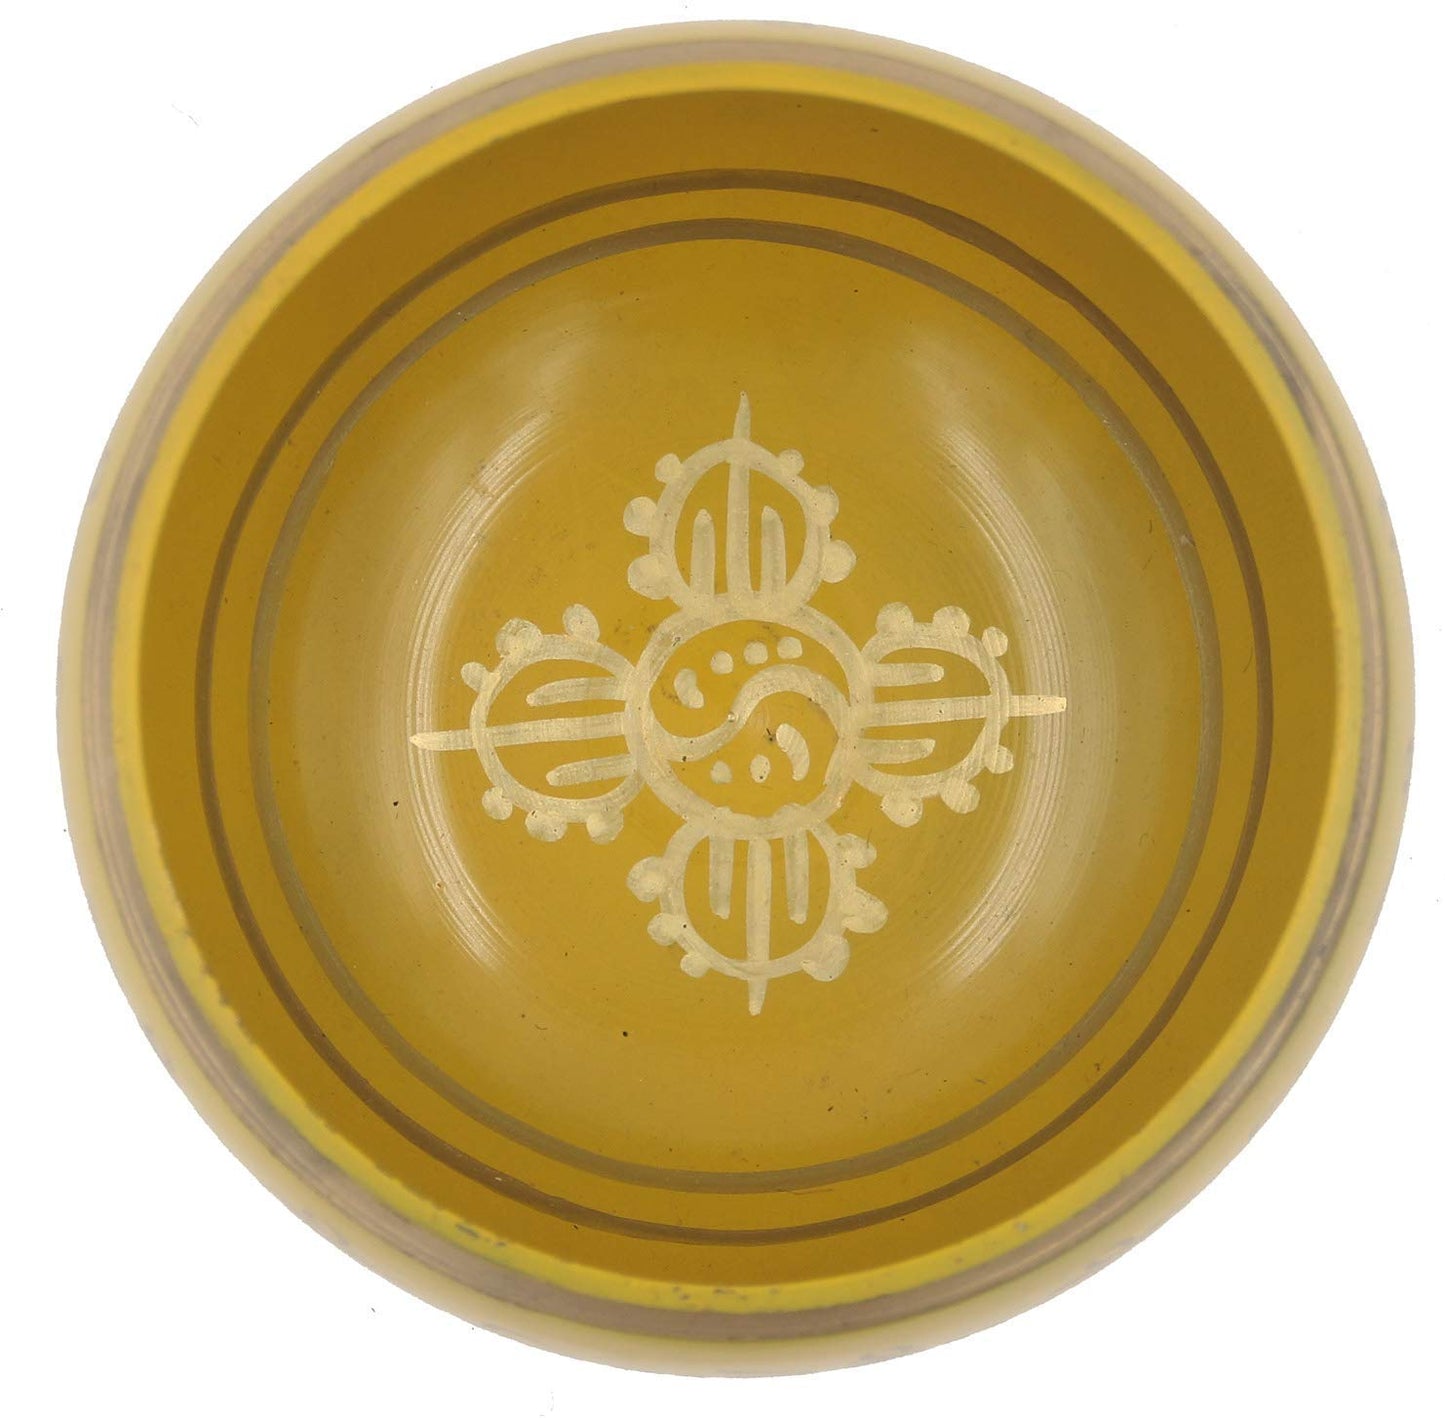 Tibetan Meditation Om Mani Padme Hum Peace Singing Bowl With Mallet (X-Large, Yellow) - DharmaObjects